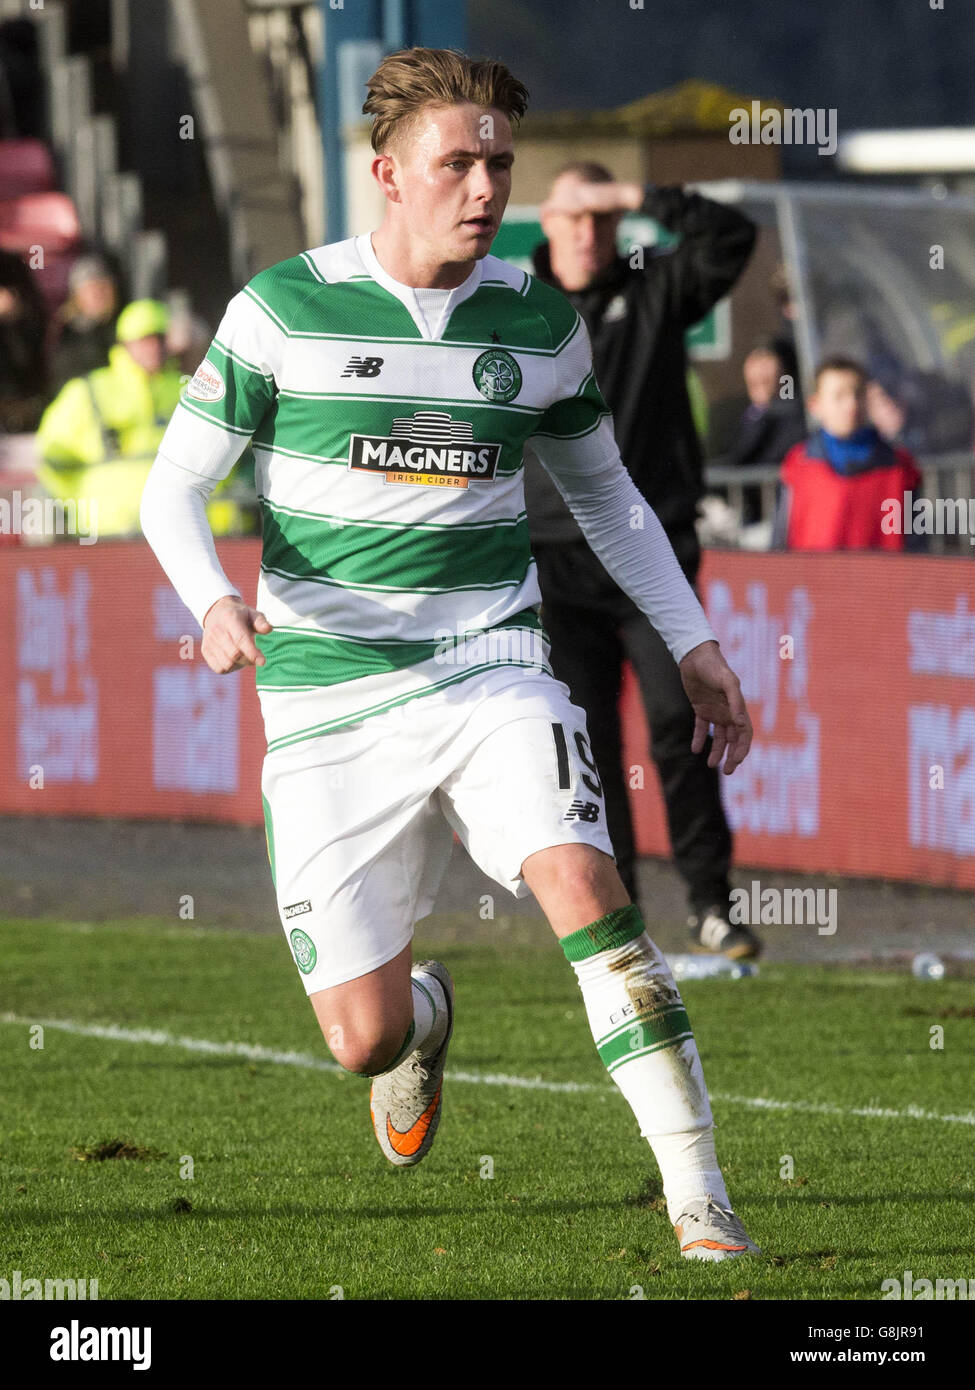 Celtic's Scott Allan during the Ladbrokes Scottish Premiership at Caledonian Stadium, Inverness. PRESS ASSOCIATION Photo. Picture date: Sunday November 29, 2015. See PA story SOCCER Inverness. Photo credit should read: Jeff Holmes/PA Wire.. Stock Photo